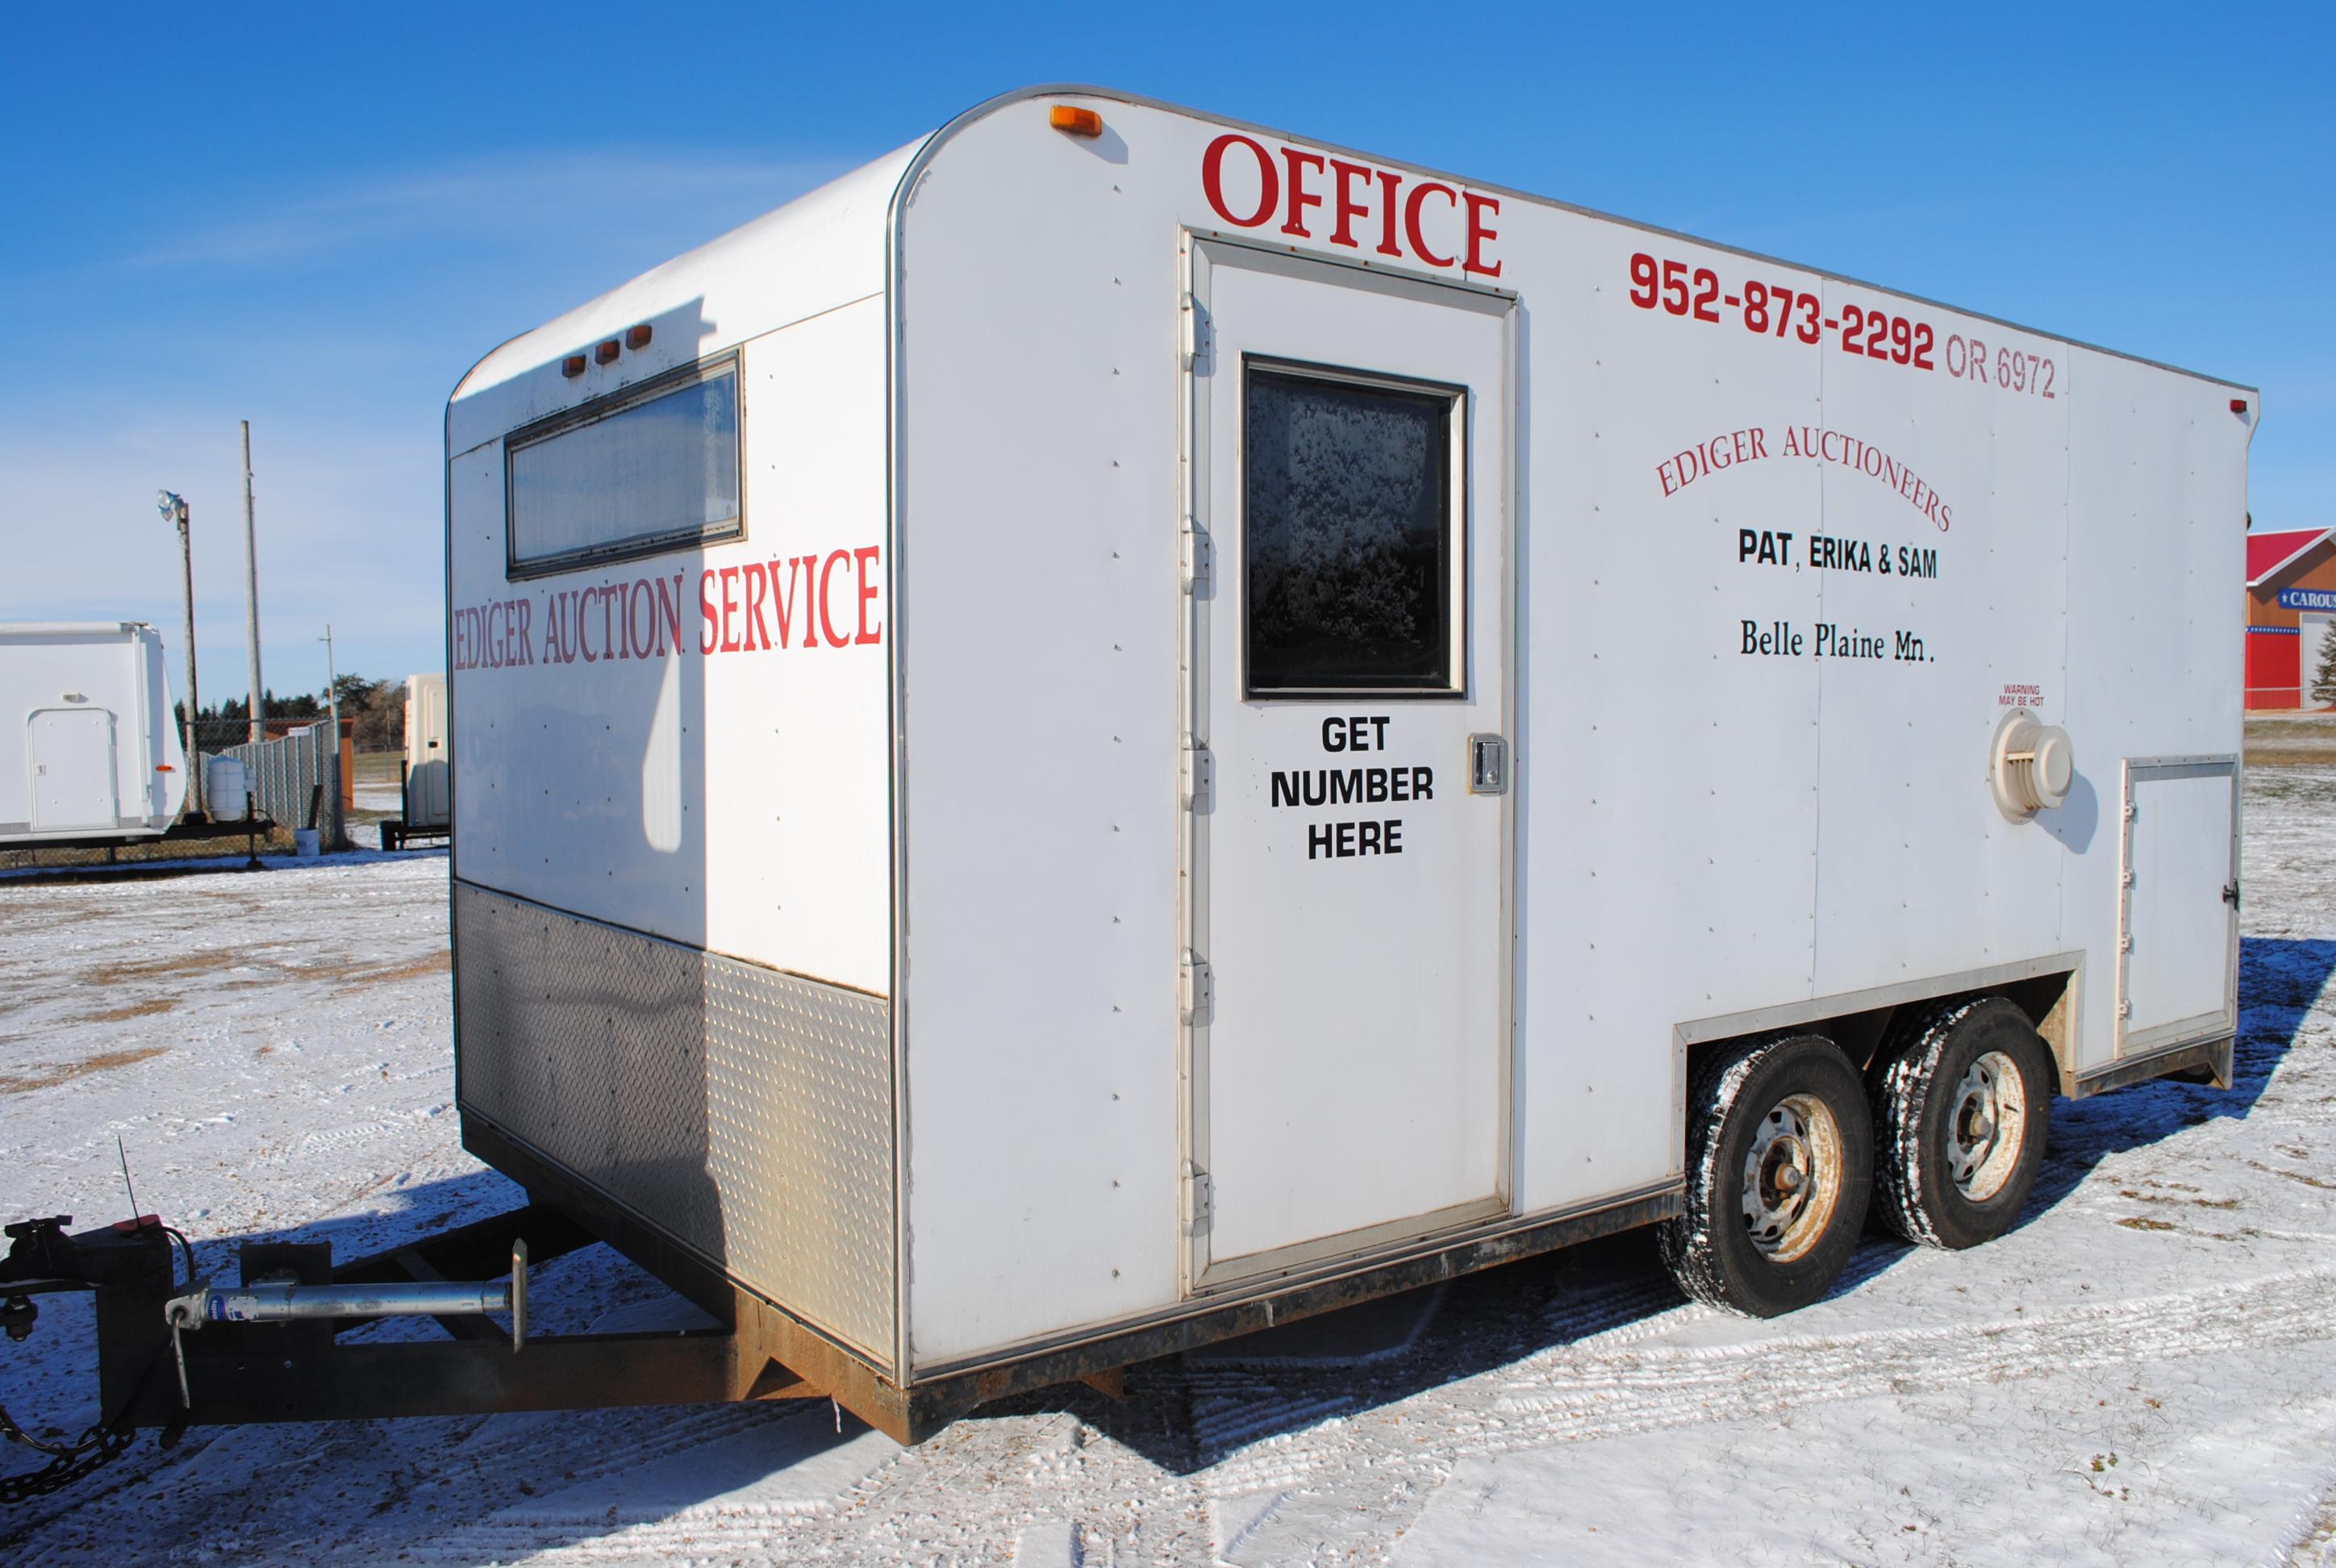 18' Office Trailer, tandem axle, brand new tires with less than 200 miles on, curb side window, pass